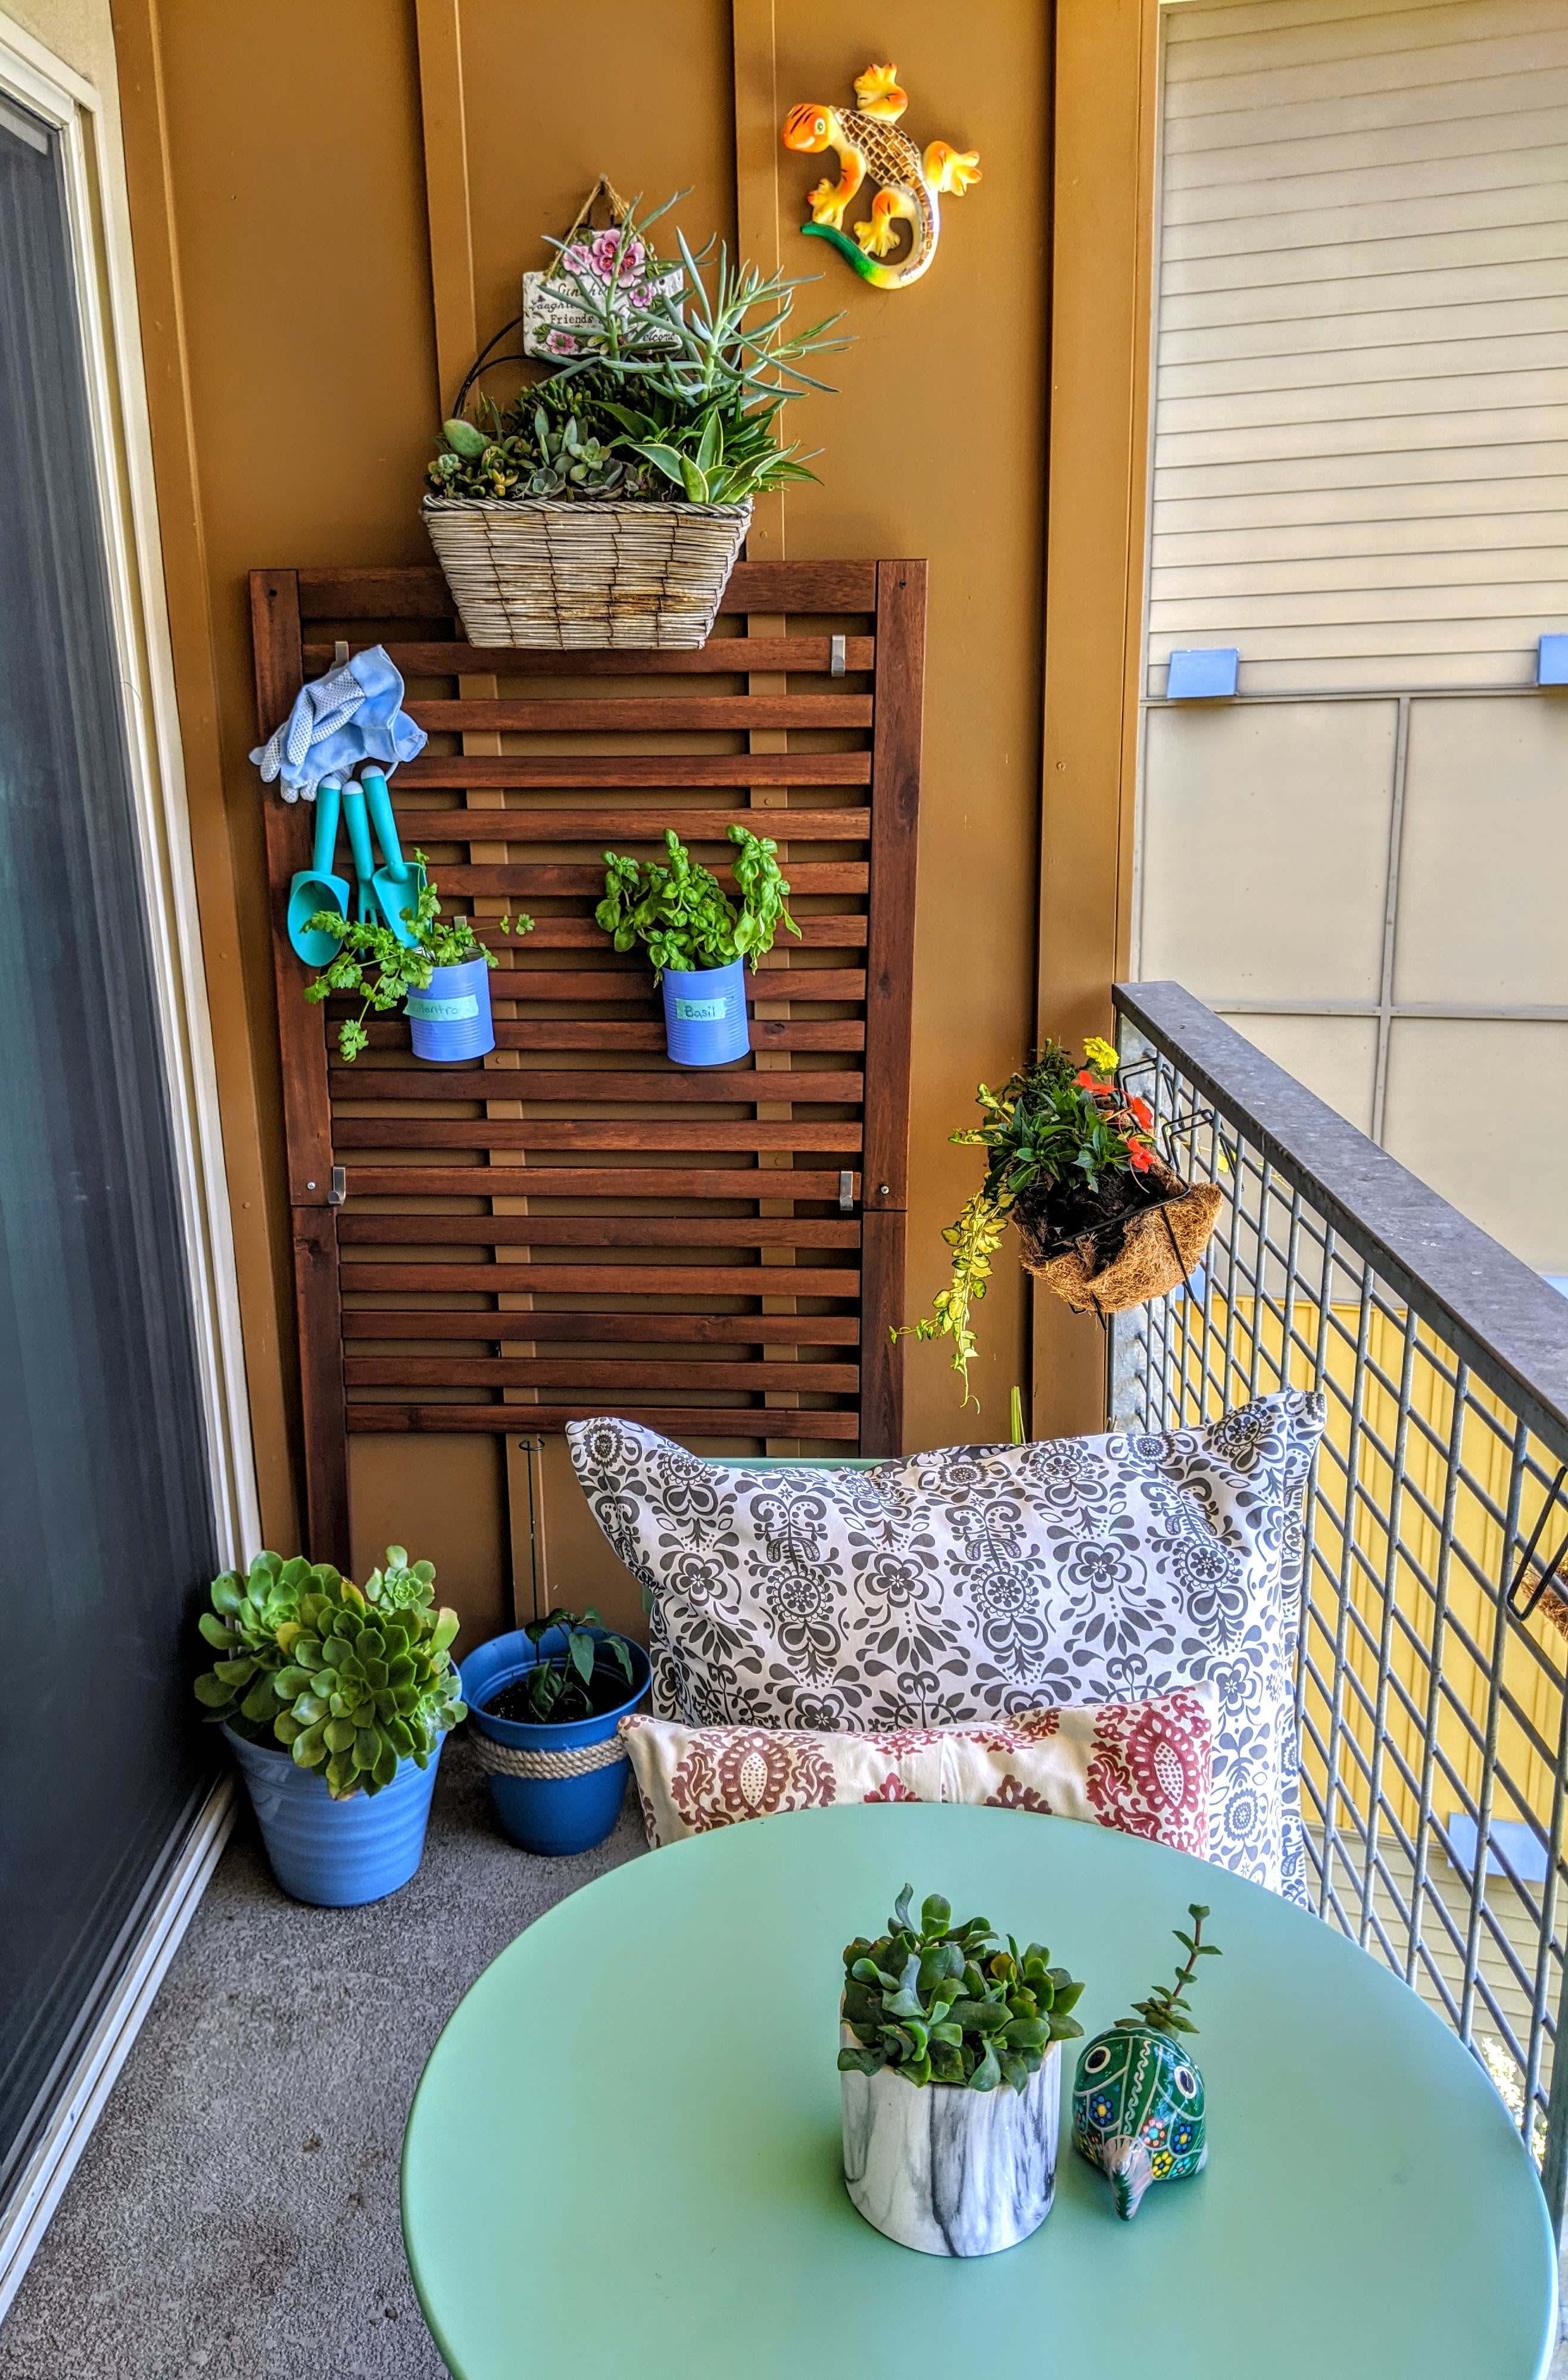 8 Amazon balcony must haves for your Spring home - Daily Dream Decor